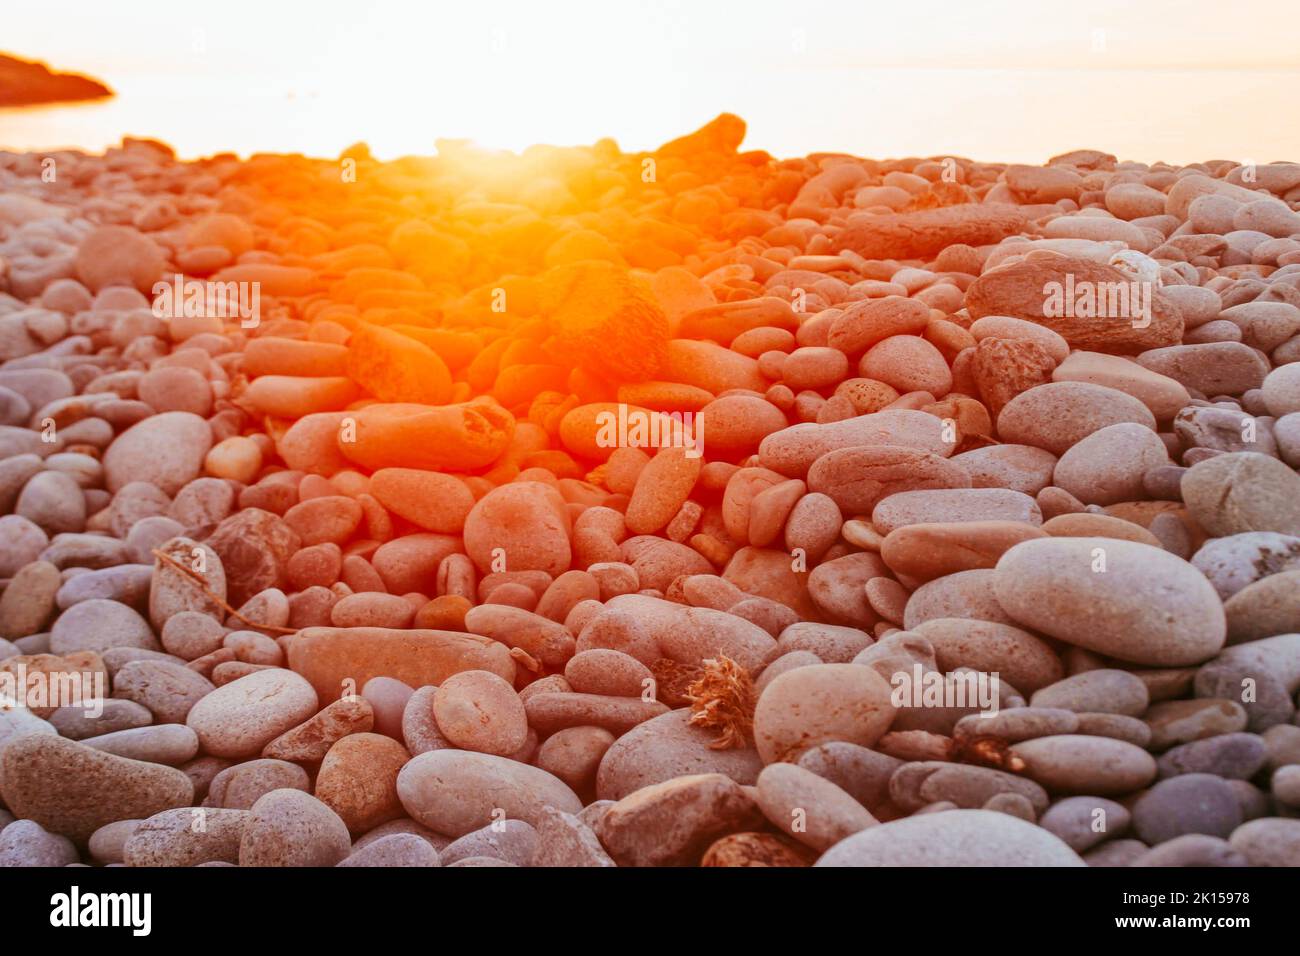 Stones and pebbles on Trefor beach, North Wales with a orange red sunset Stock Photo